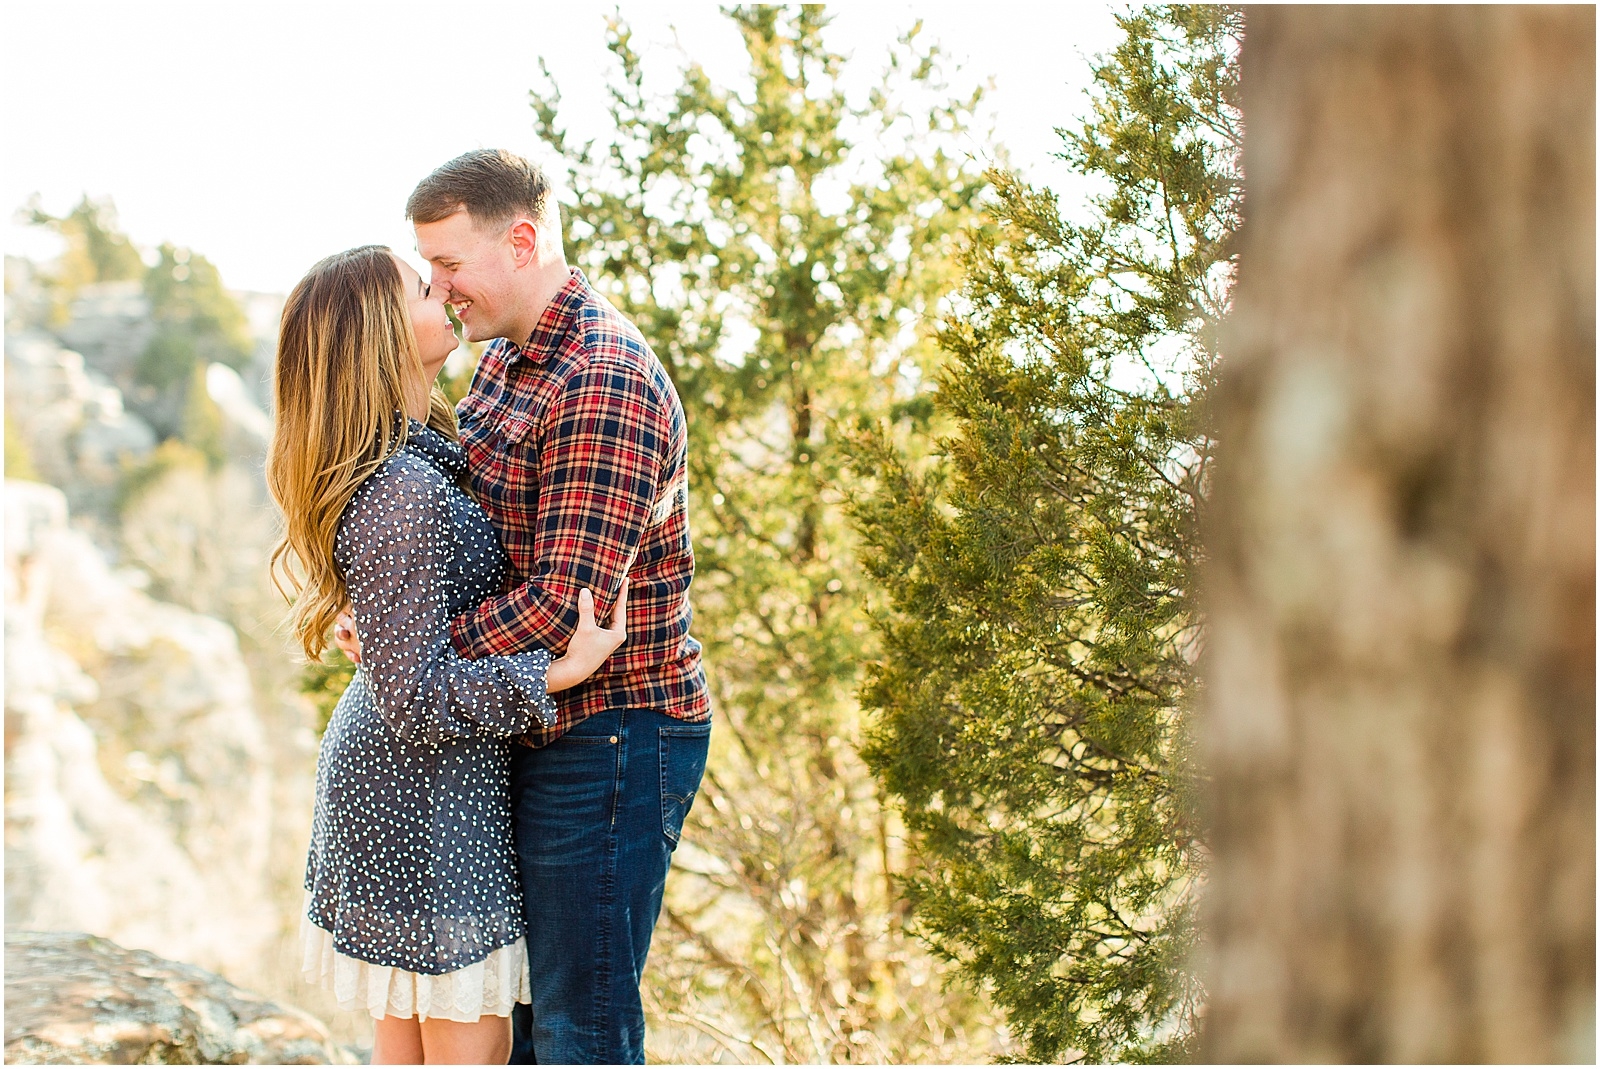 A Sunny Garden of the Gods Engagement Session | Shiloh and Lee | Bret and Brandie Photography003.jpg